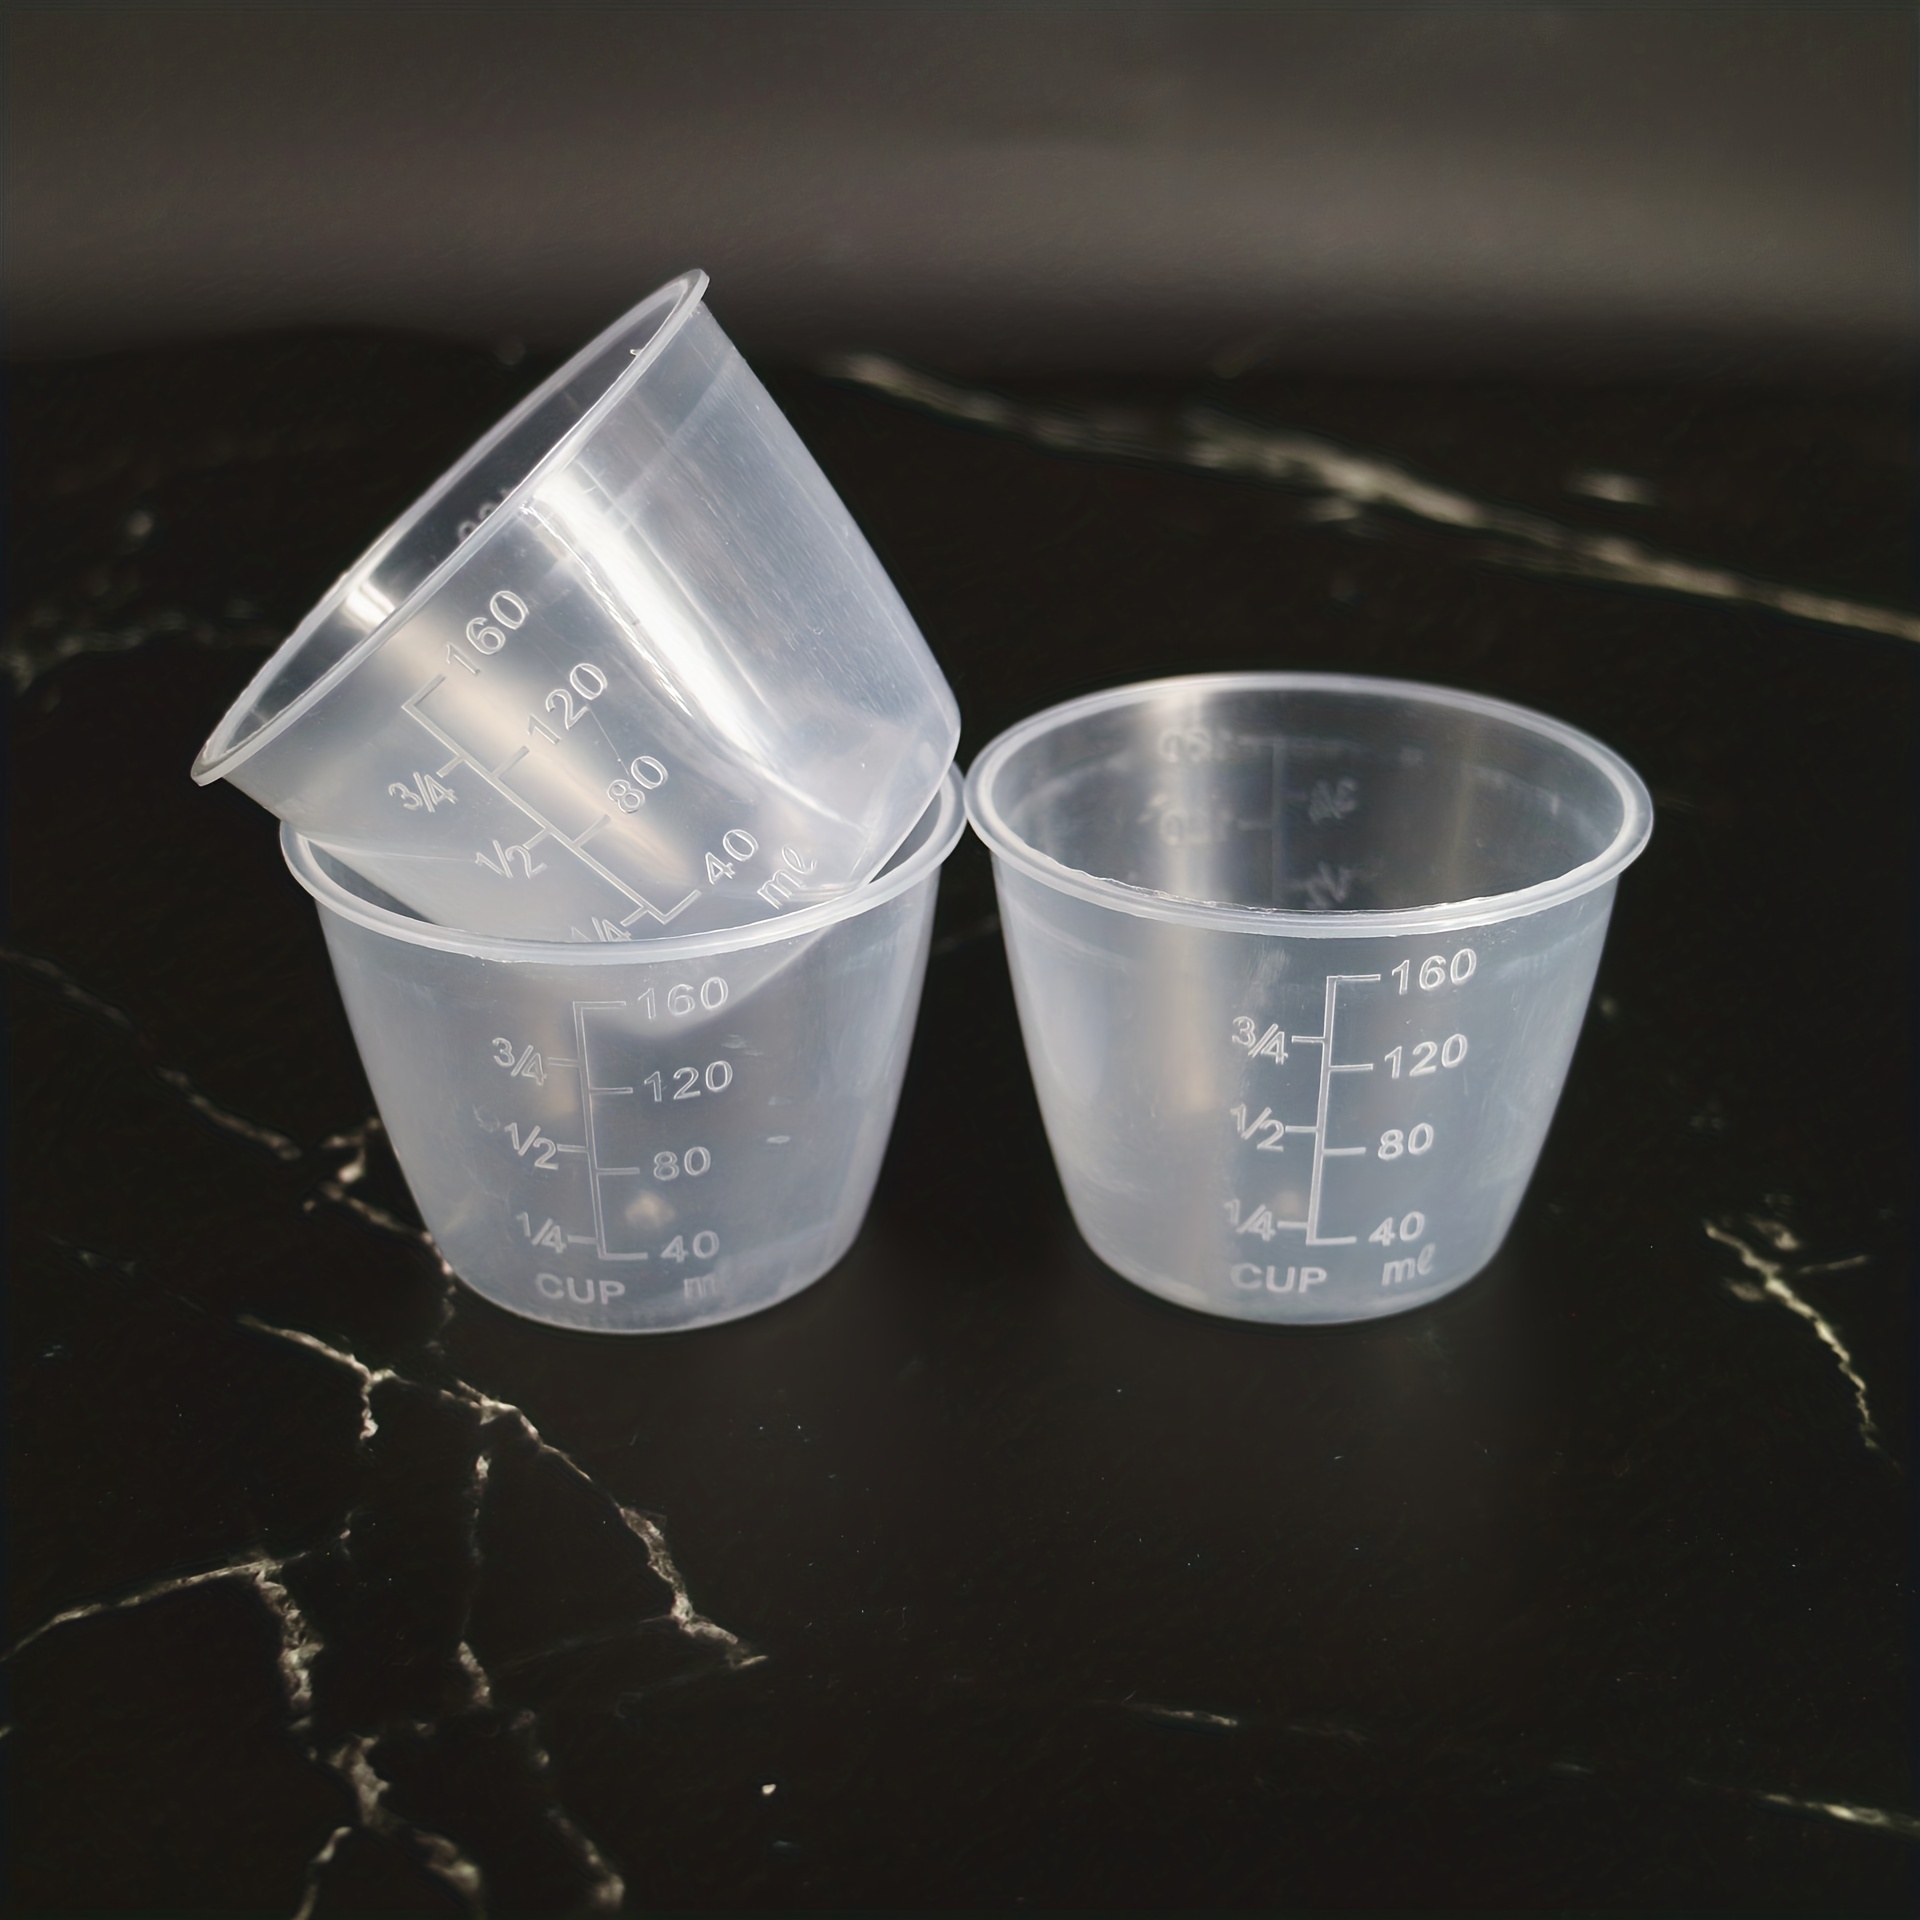 Plastic 120ml Electric Cooker Rice Measuring Cup 2pcs Clear White